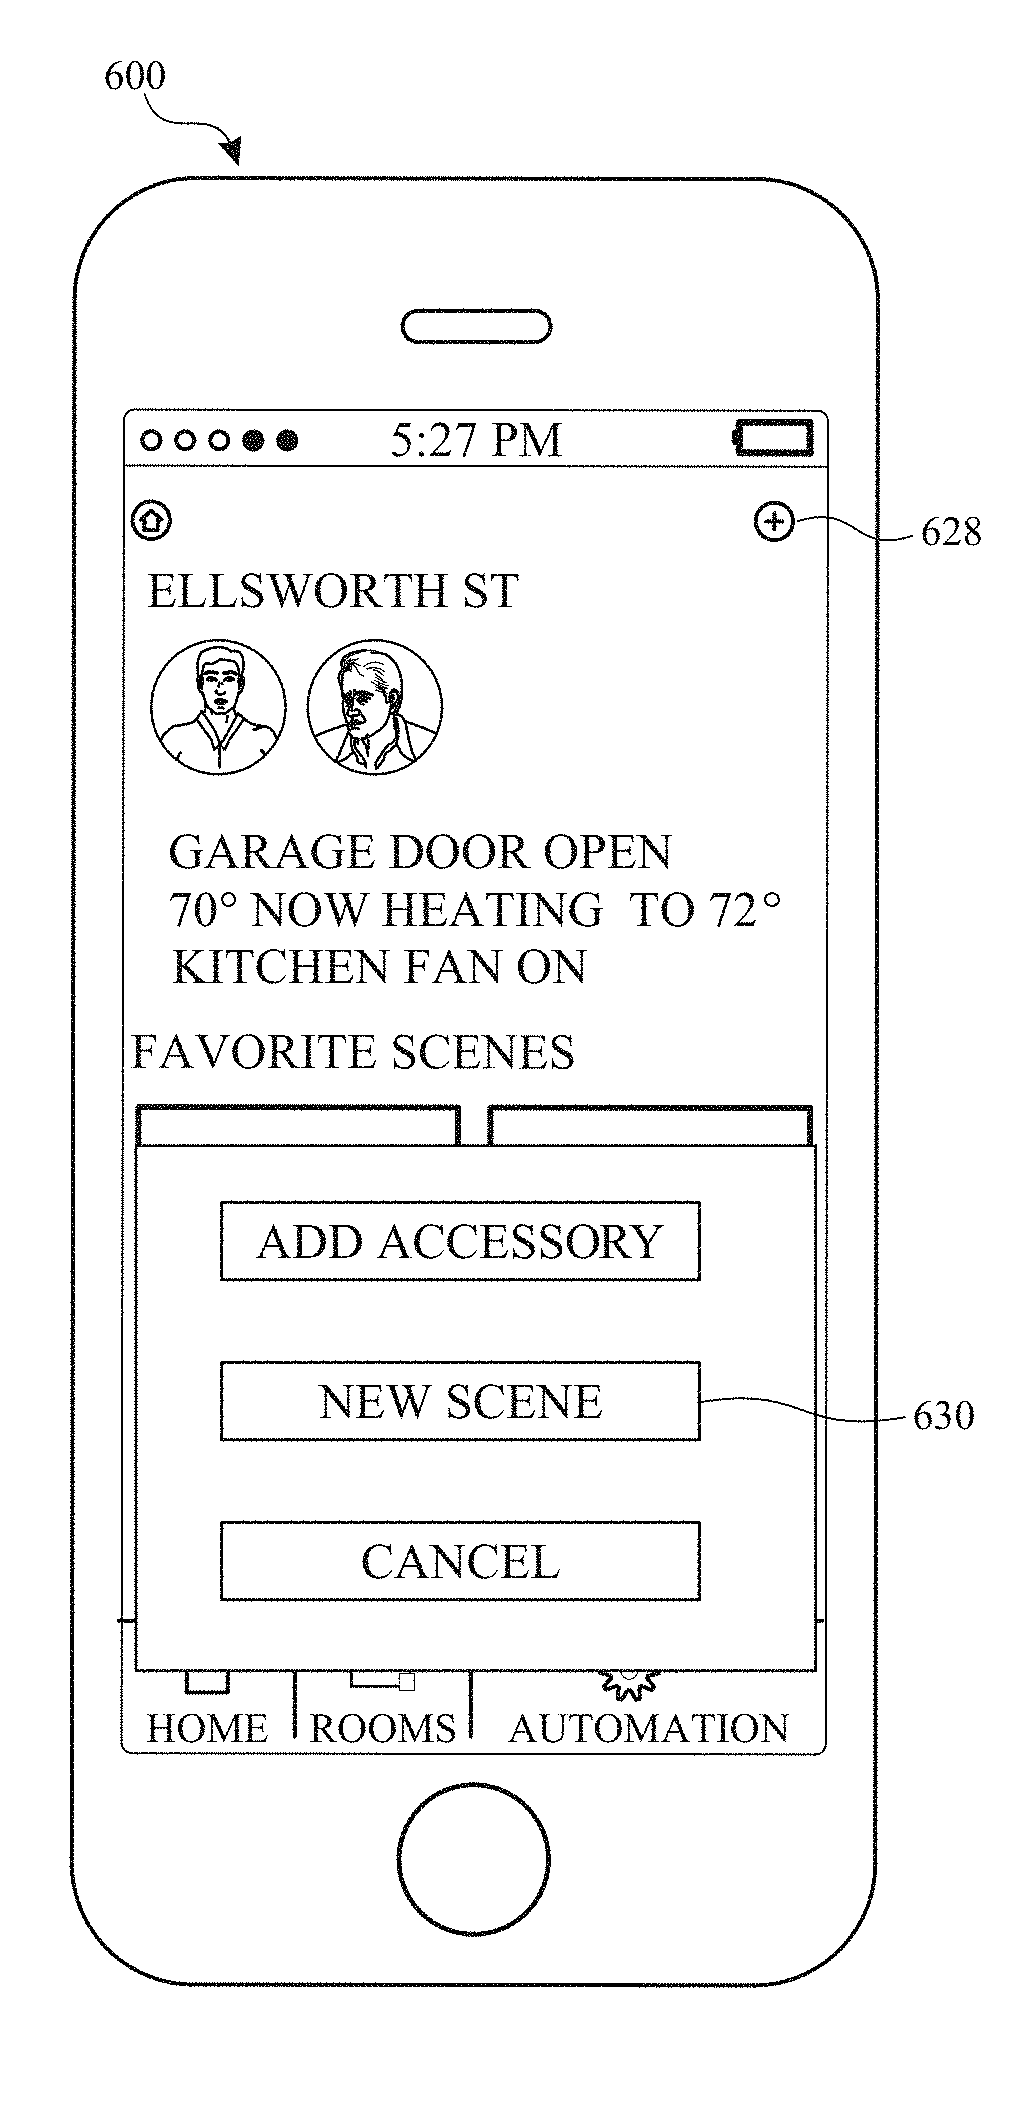 User interface for managing controllable external devices